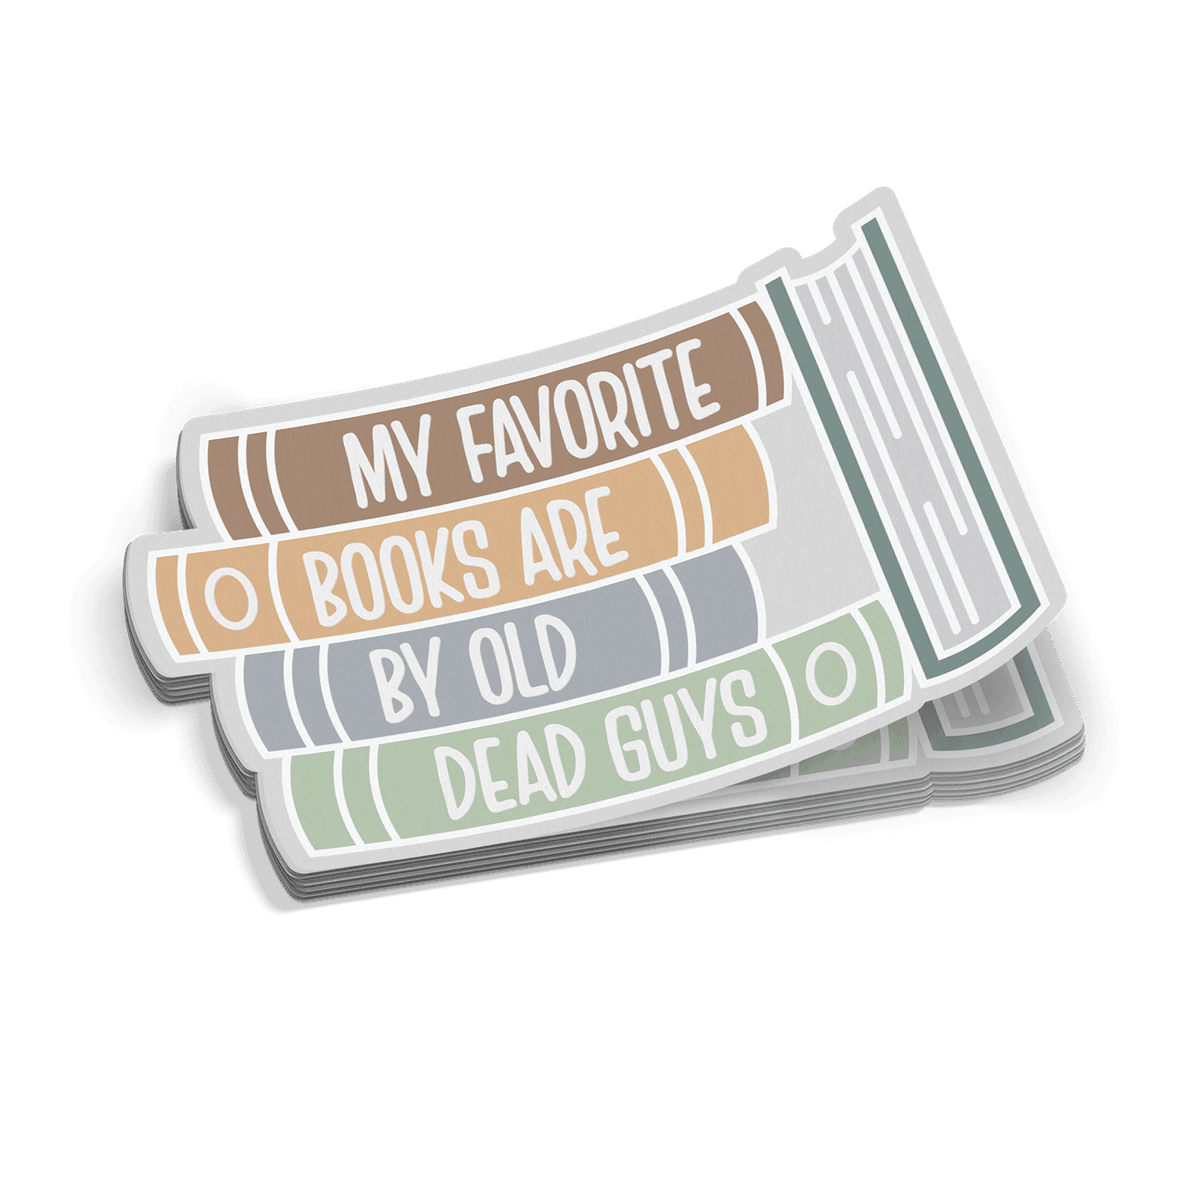 Stickers with Books, Stickers for Book Lovers